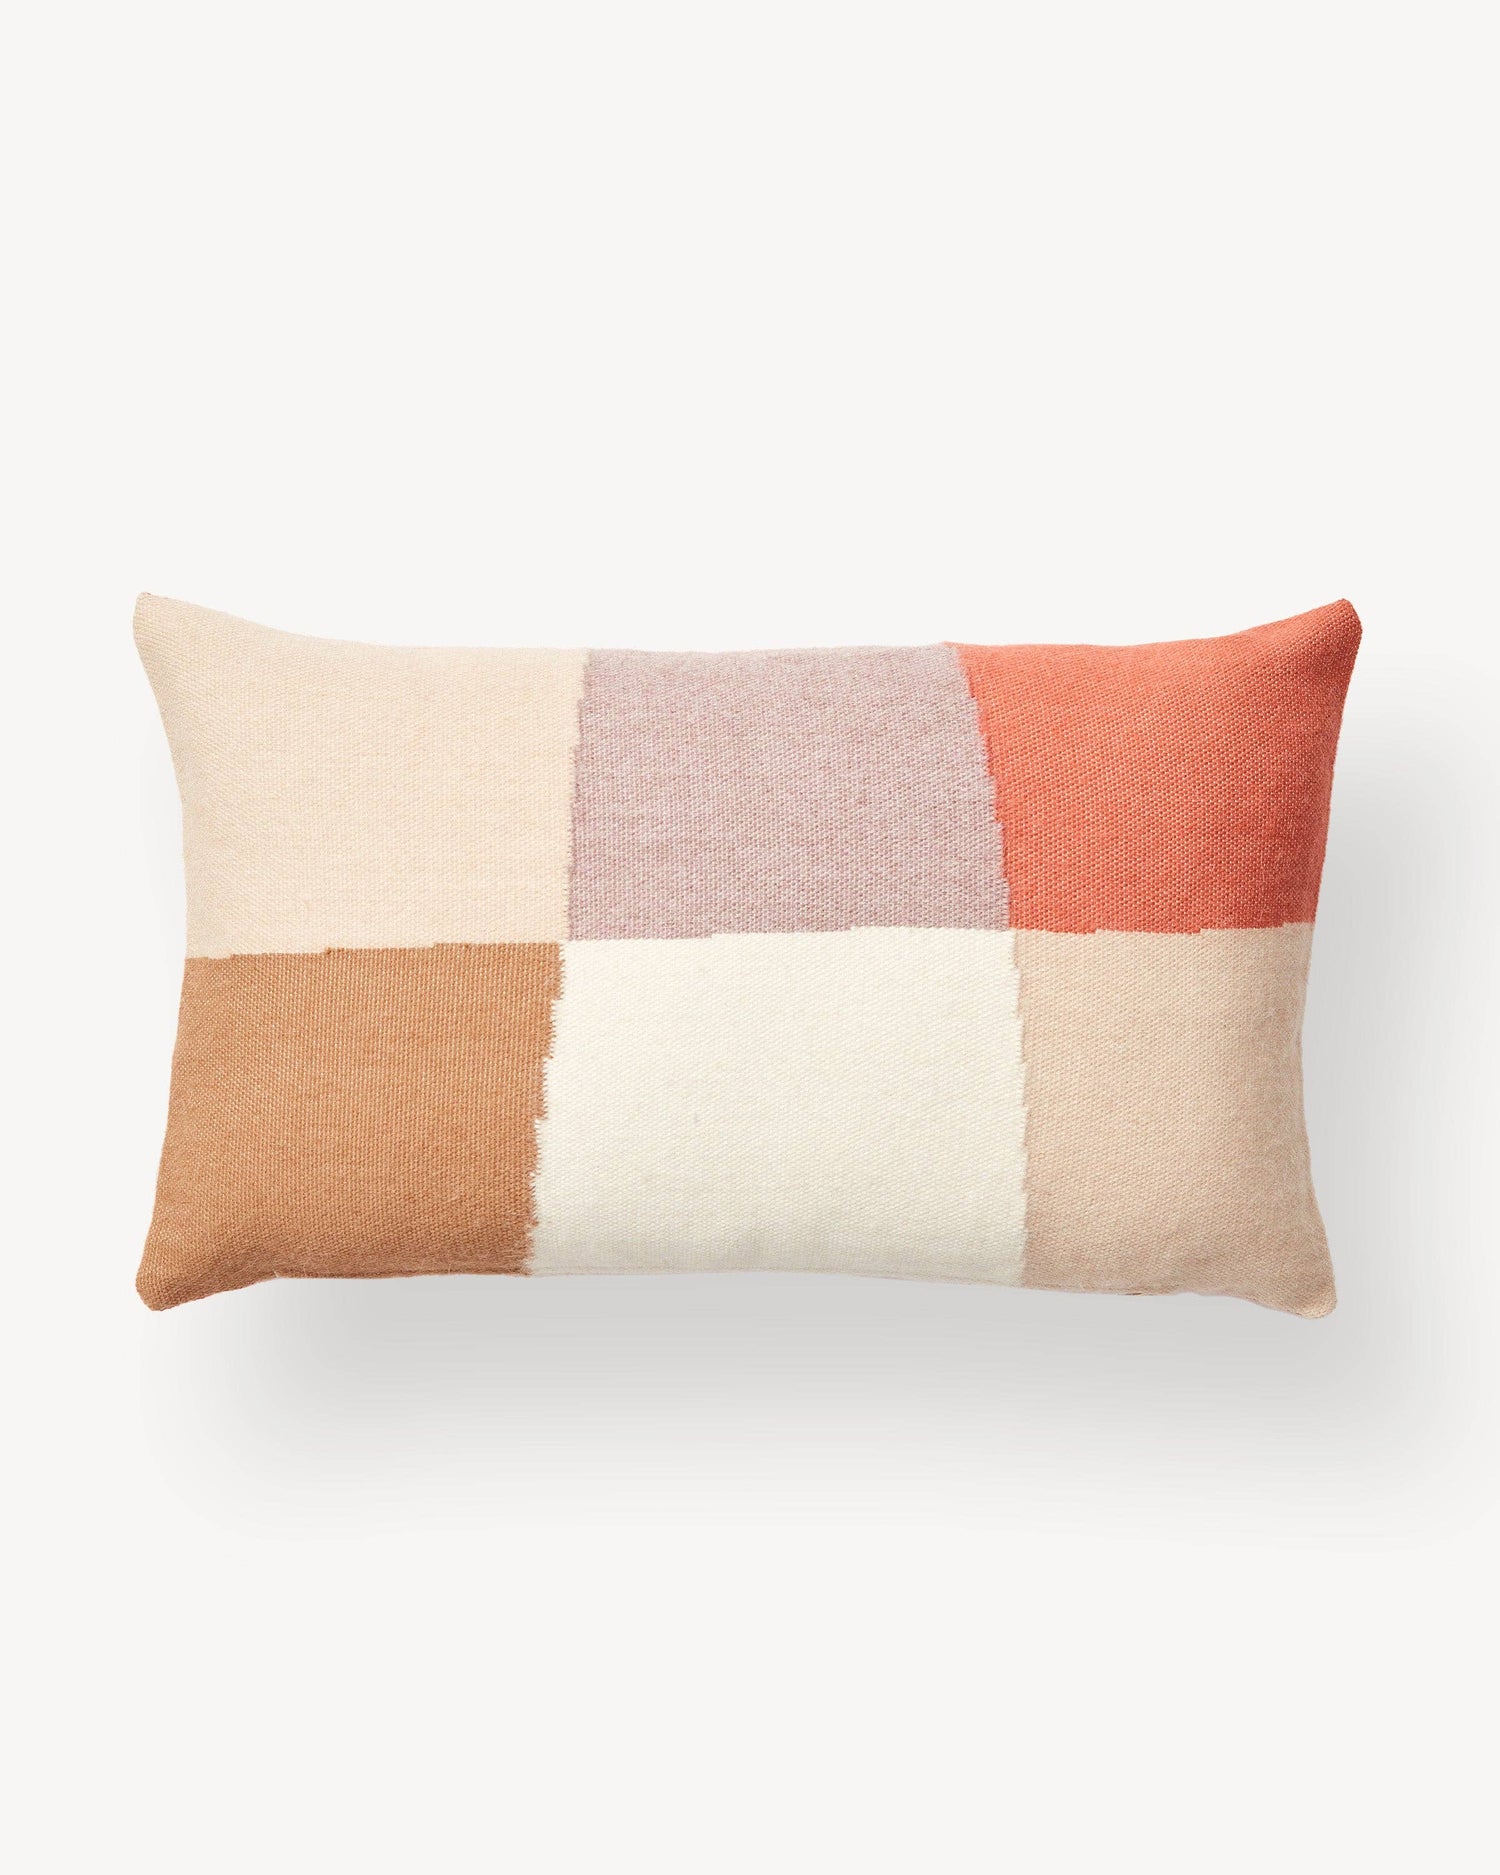 Handwoven out of 100% alpaca wool, the Patchwork Pillow looks great as a throw pillow for the sofa or bed, and is soft enough for napping. Crafted by an artisan co-op in Lima, Peru.